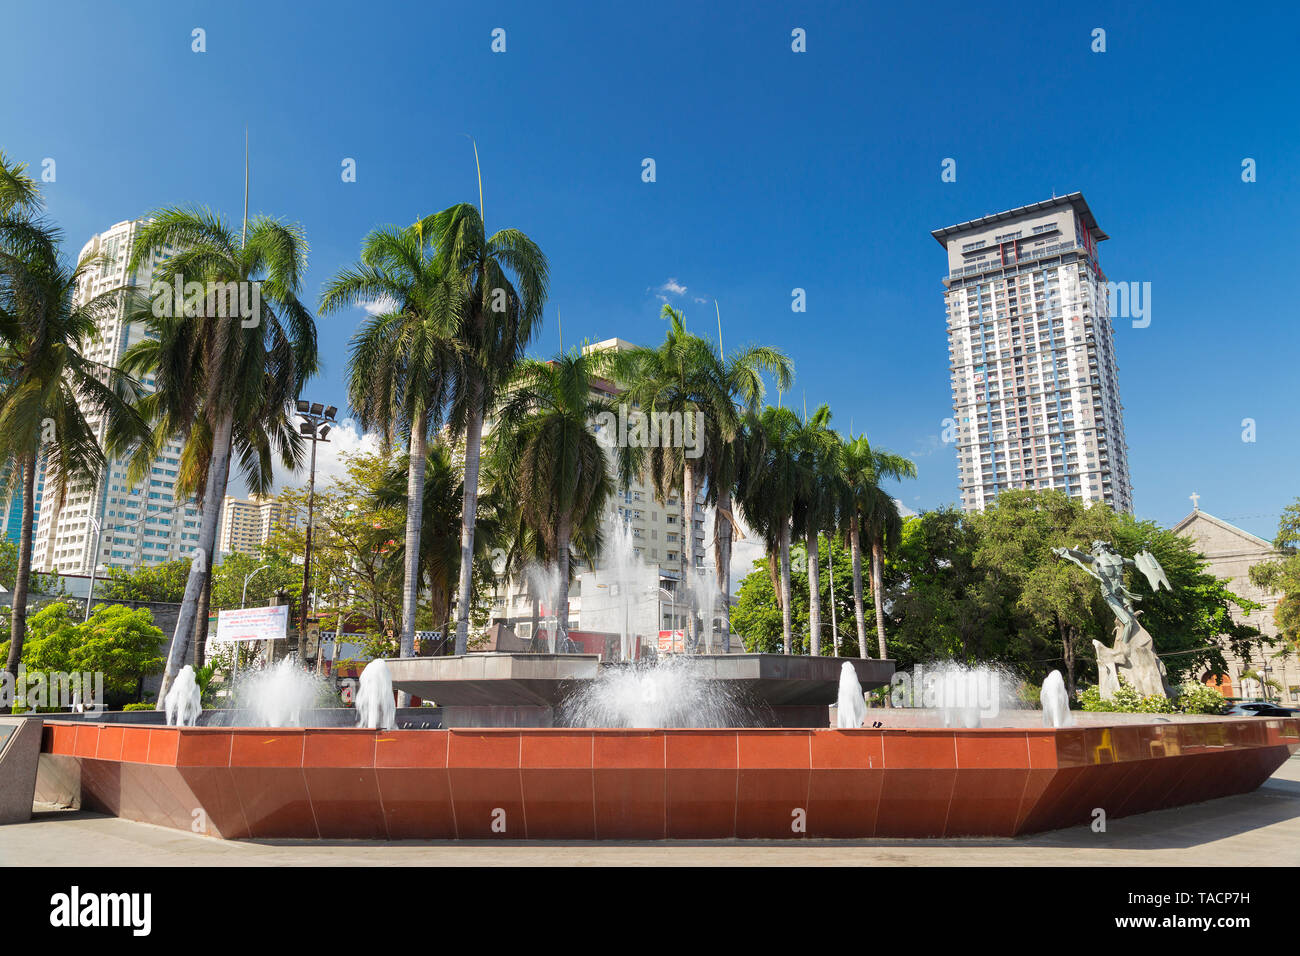 A fountain with palms in Manila, Philippines Stock Photo